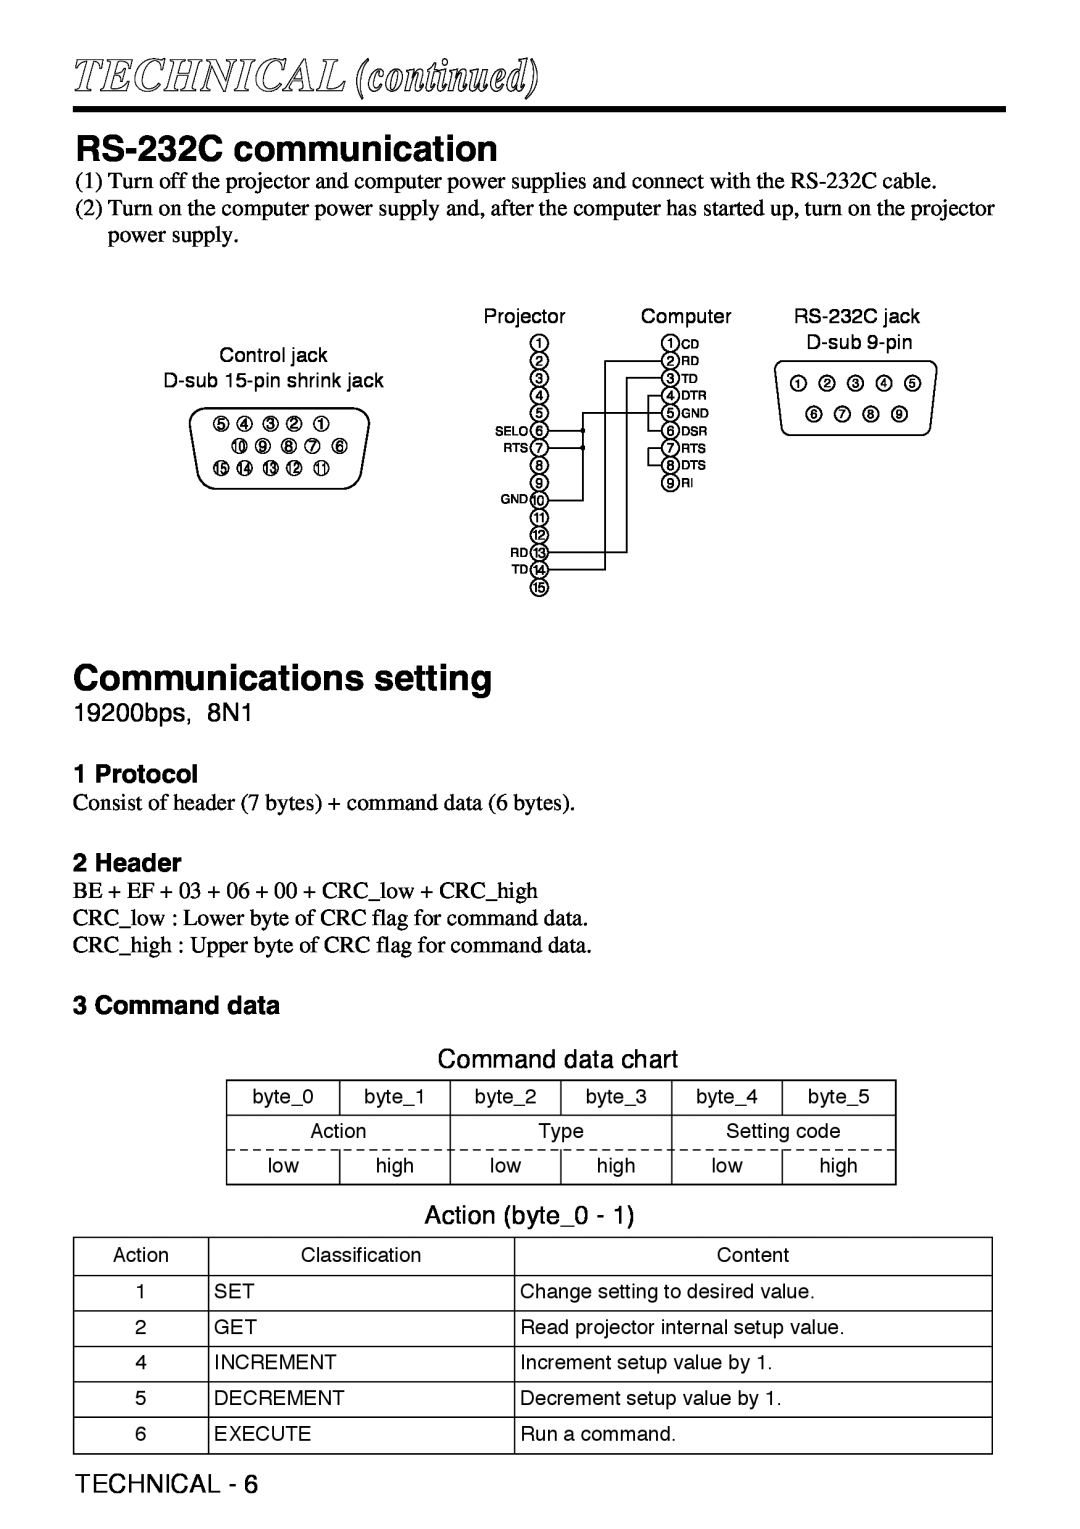 Grundig CP-731i RS-232C communication, Communications setting, Protocol, Header, Command data, TECHNICAL continued 